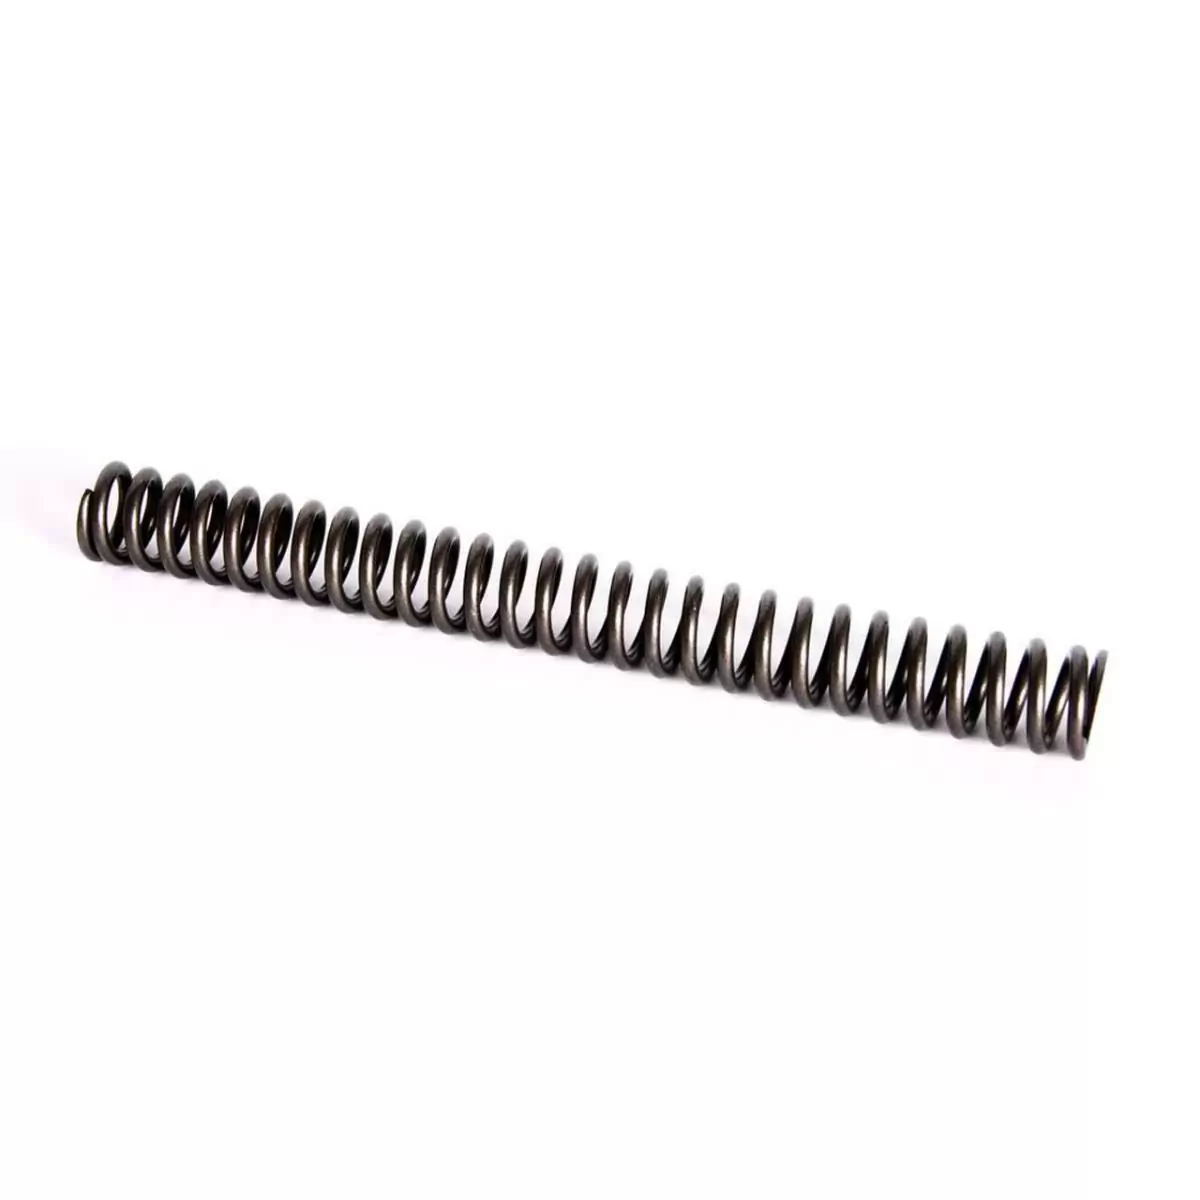 Coil spring soft for sf13 xct jr - image